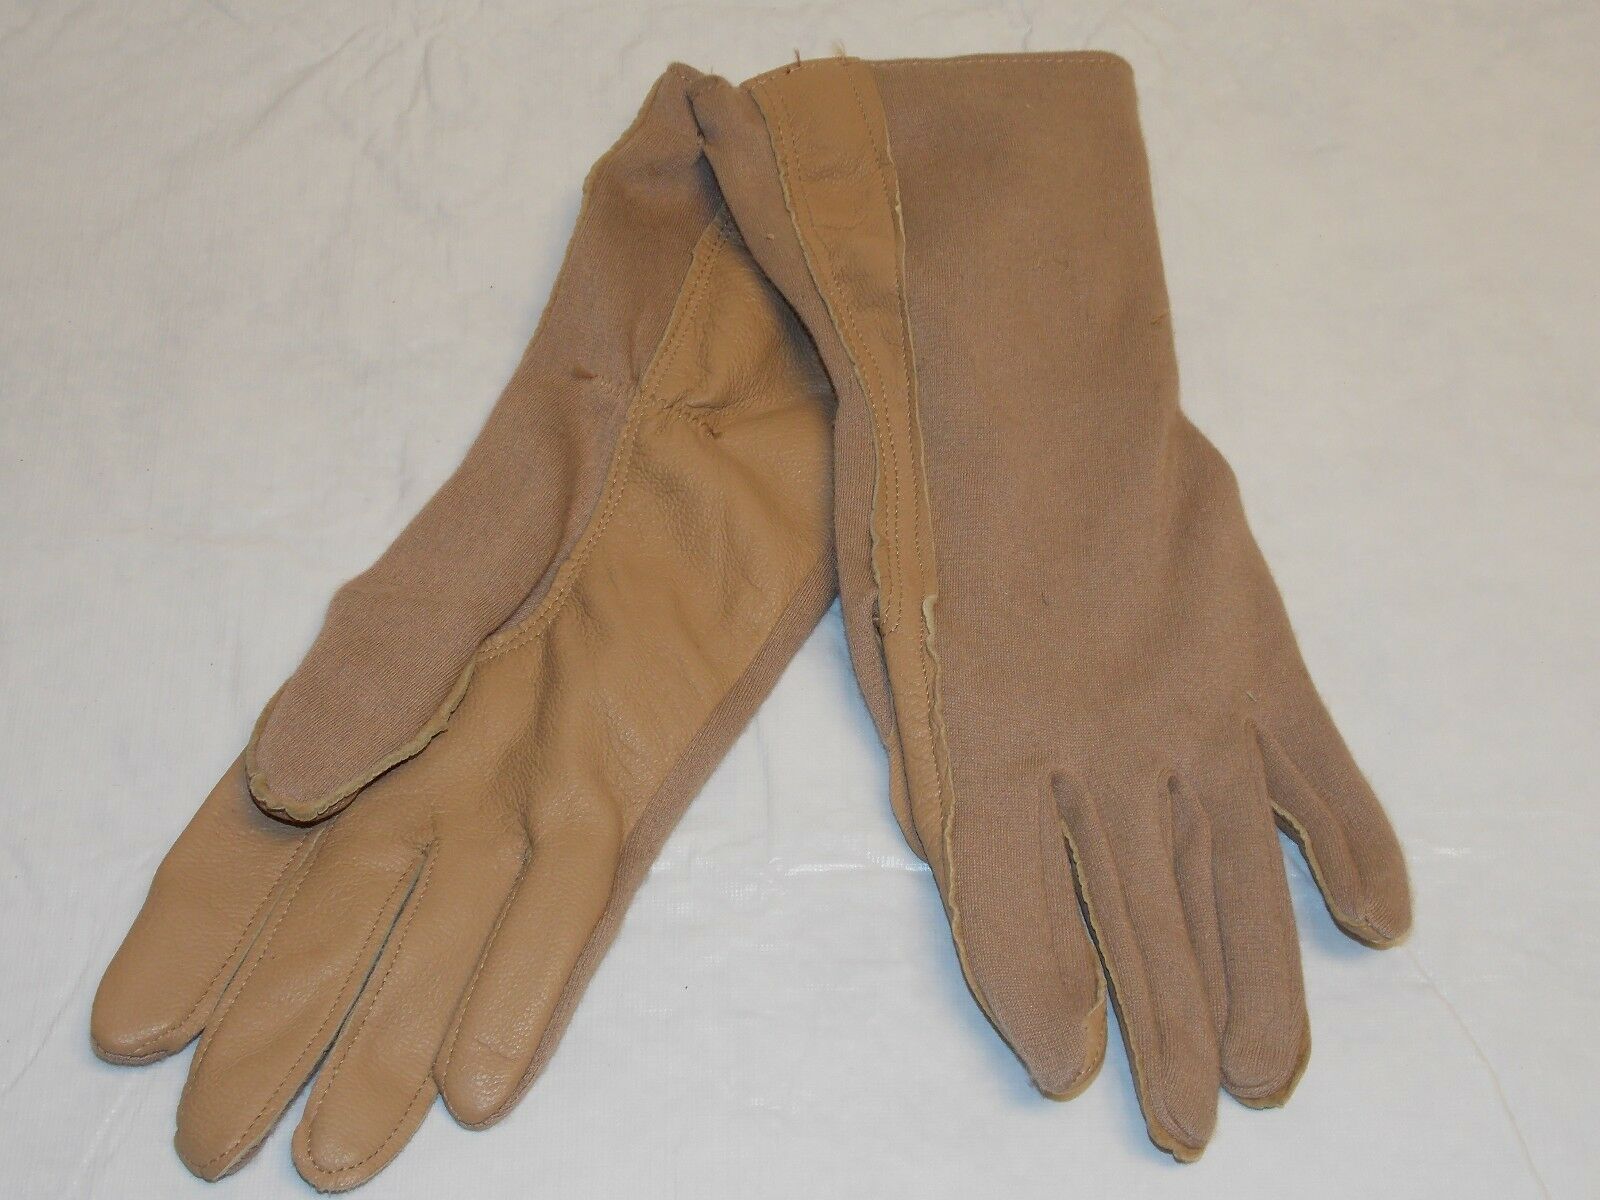 NEW MILITARY ISSUE SUMMER FLYERS GLOVES FLAME RESISTANT DESERT TAN SIZE: 10 MED